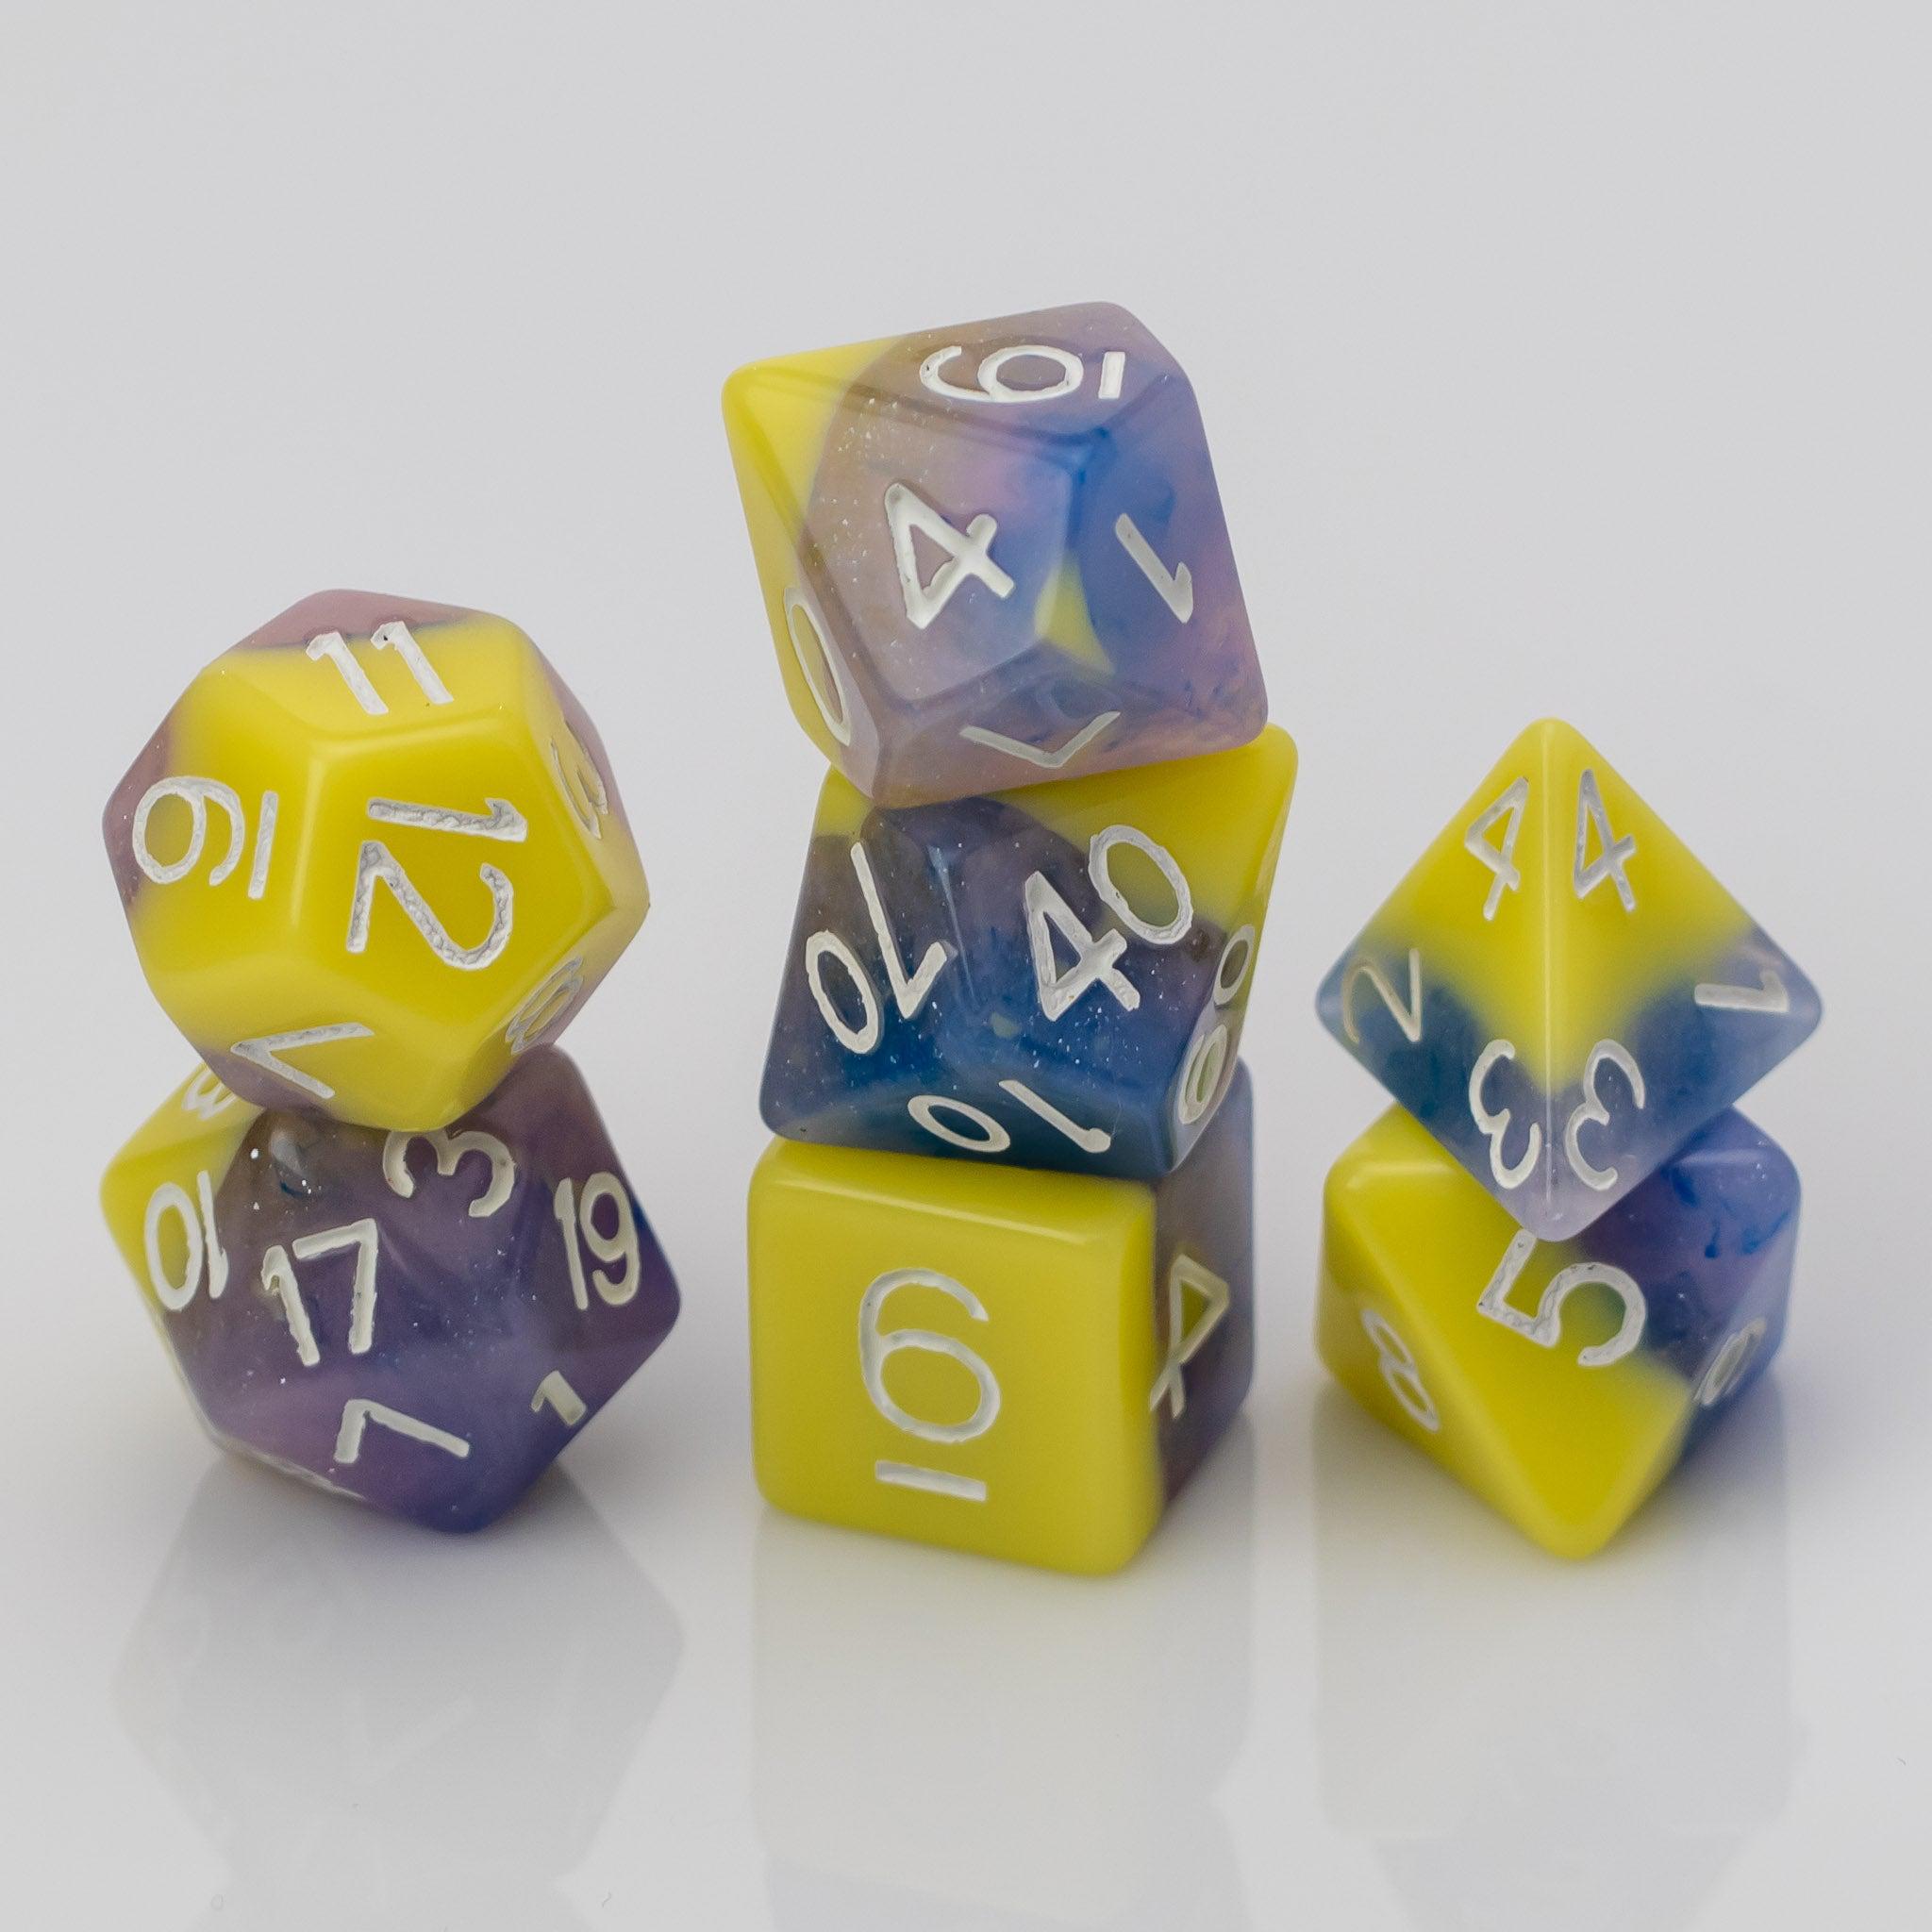 Cottton Candy, mulitcolored resin RPG dice 7 piece set stacked.